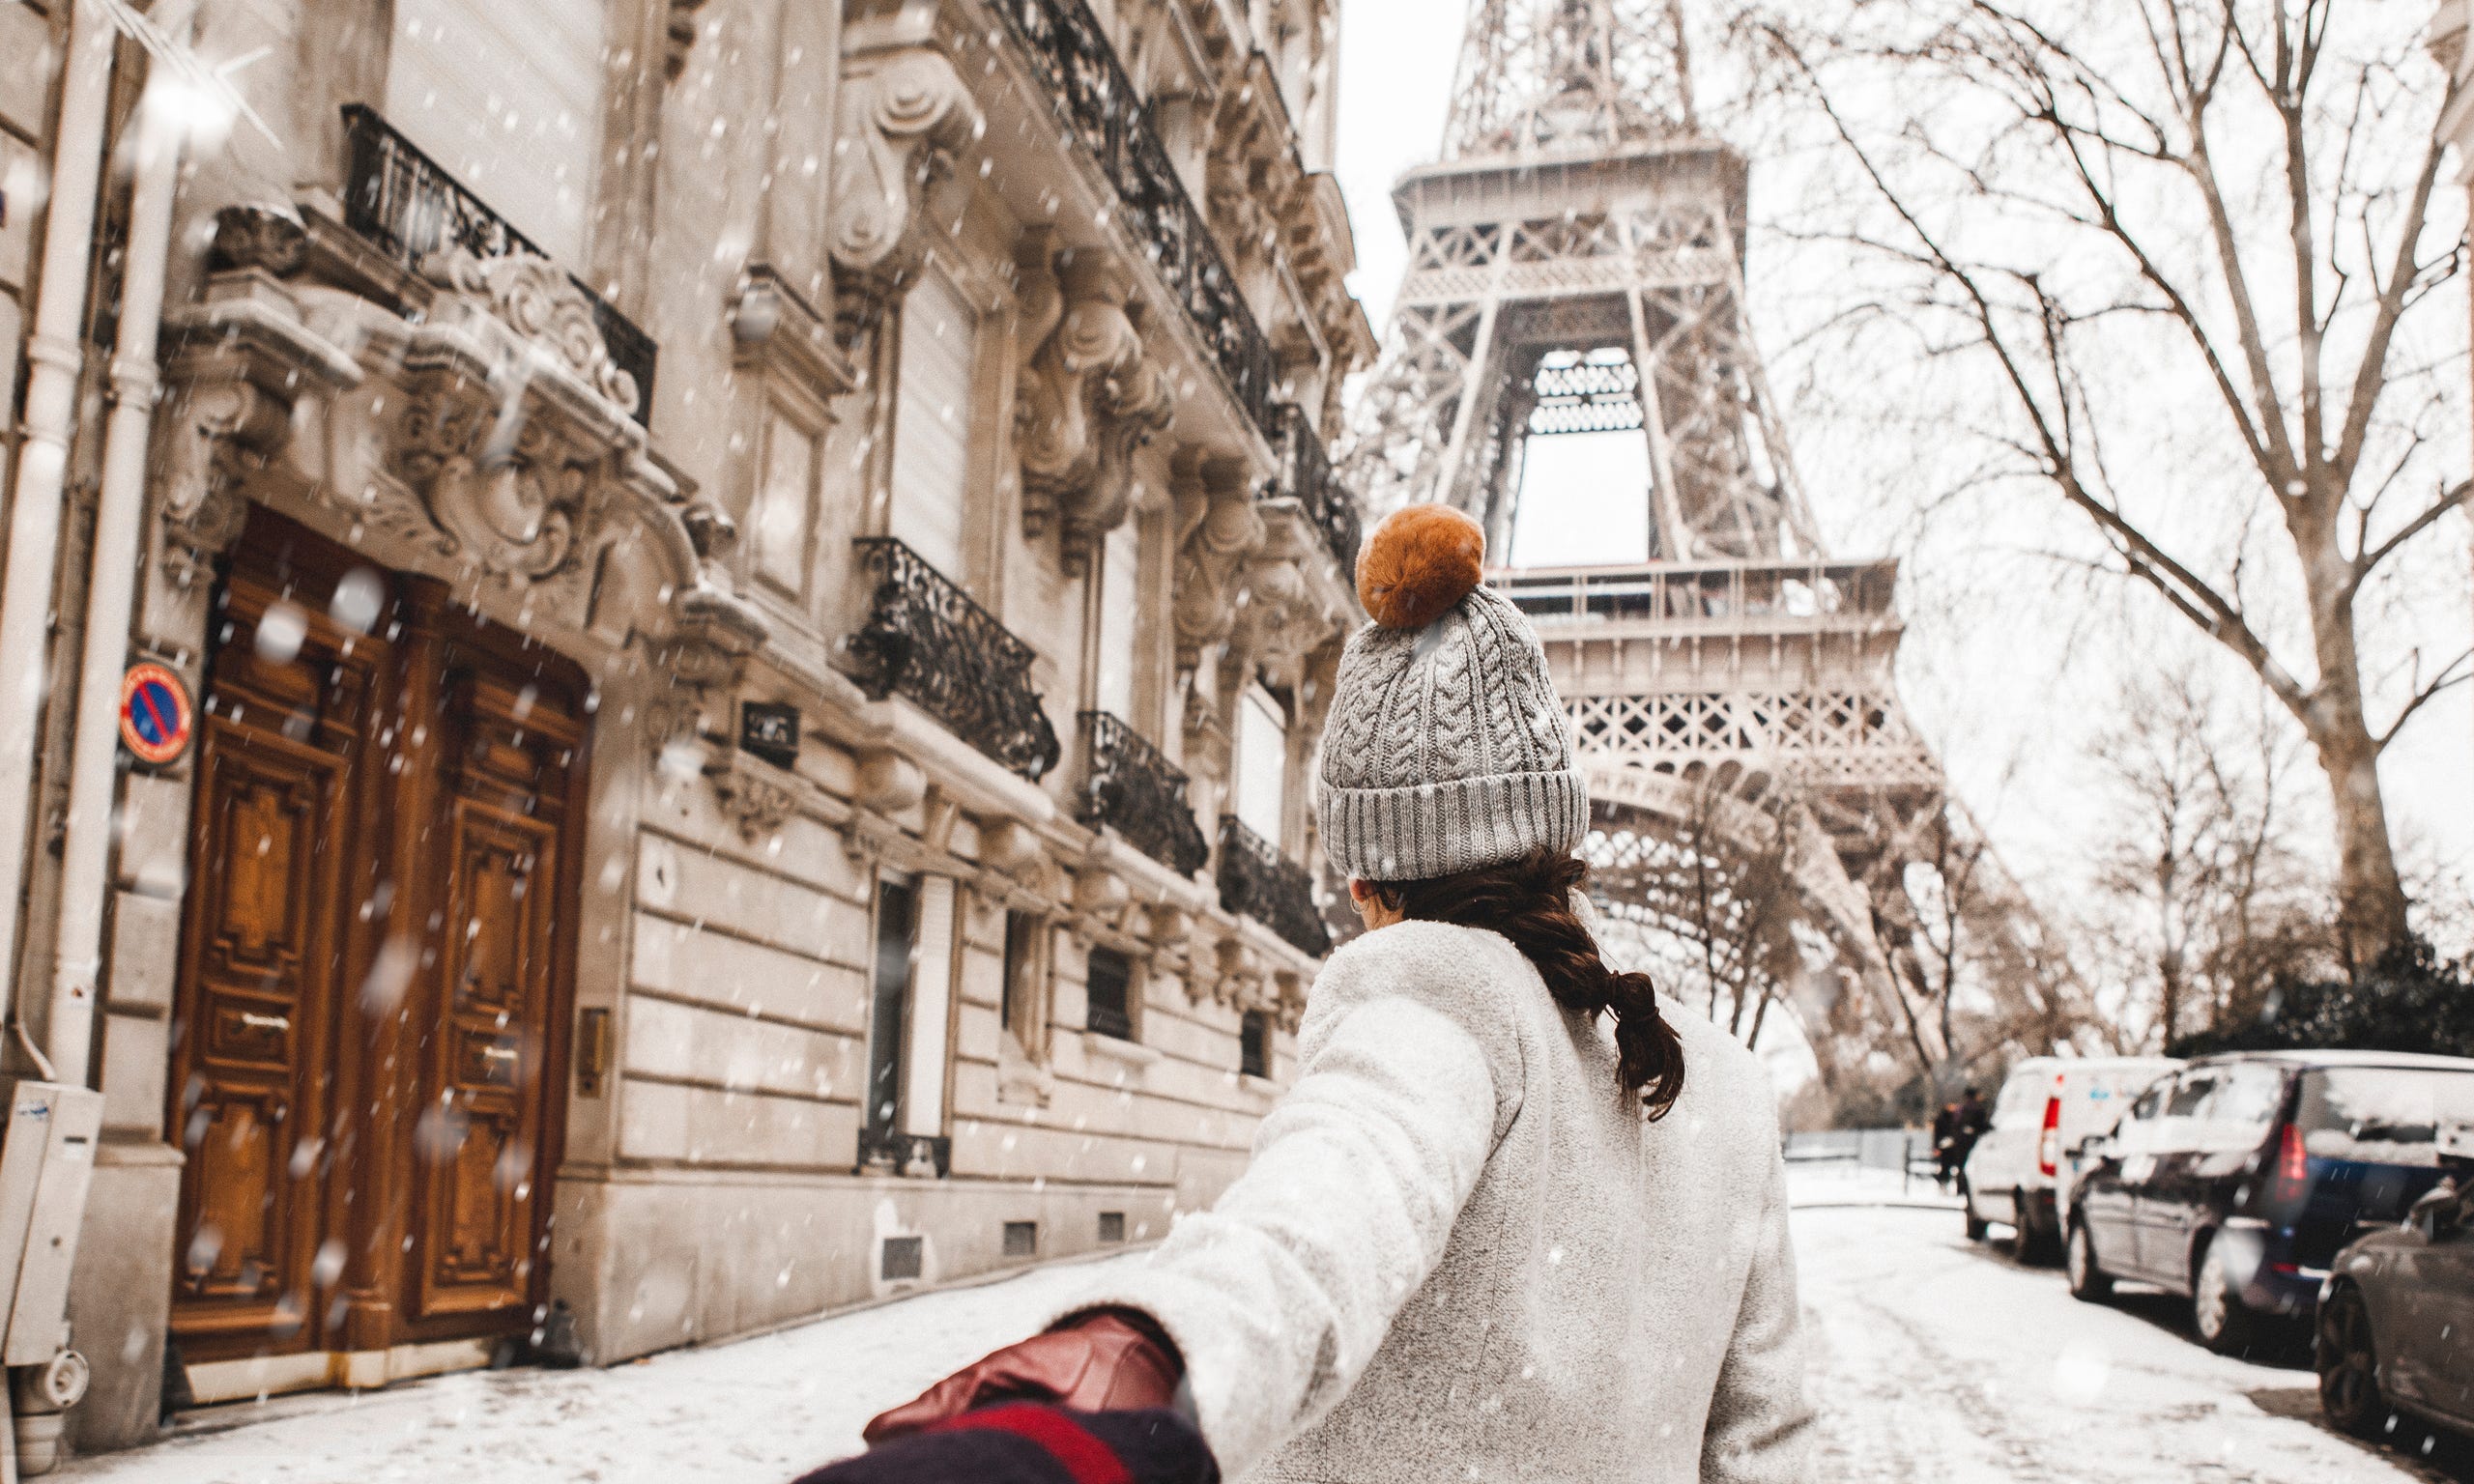 A person with insider tips on holiday travel walks in the snow in Paris, with the Eiffel Tower in the background.